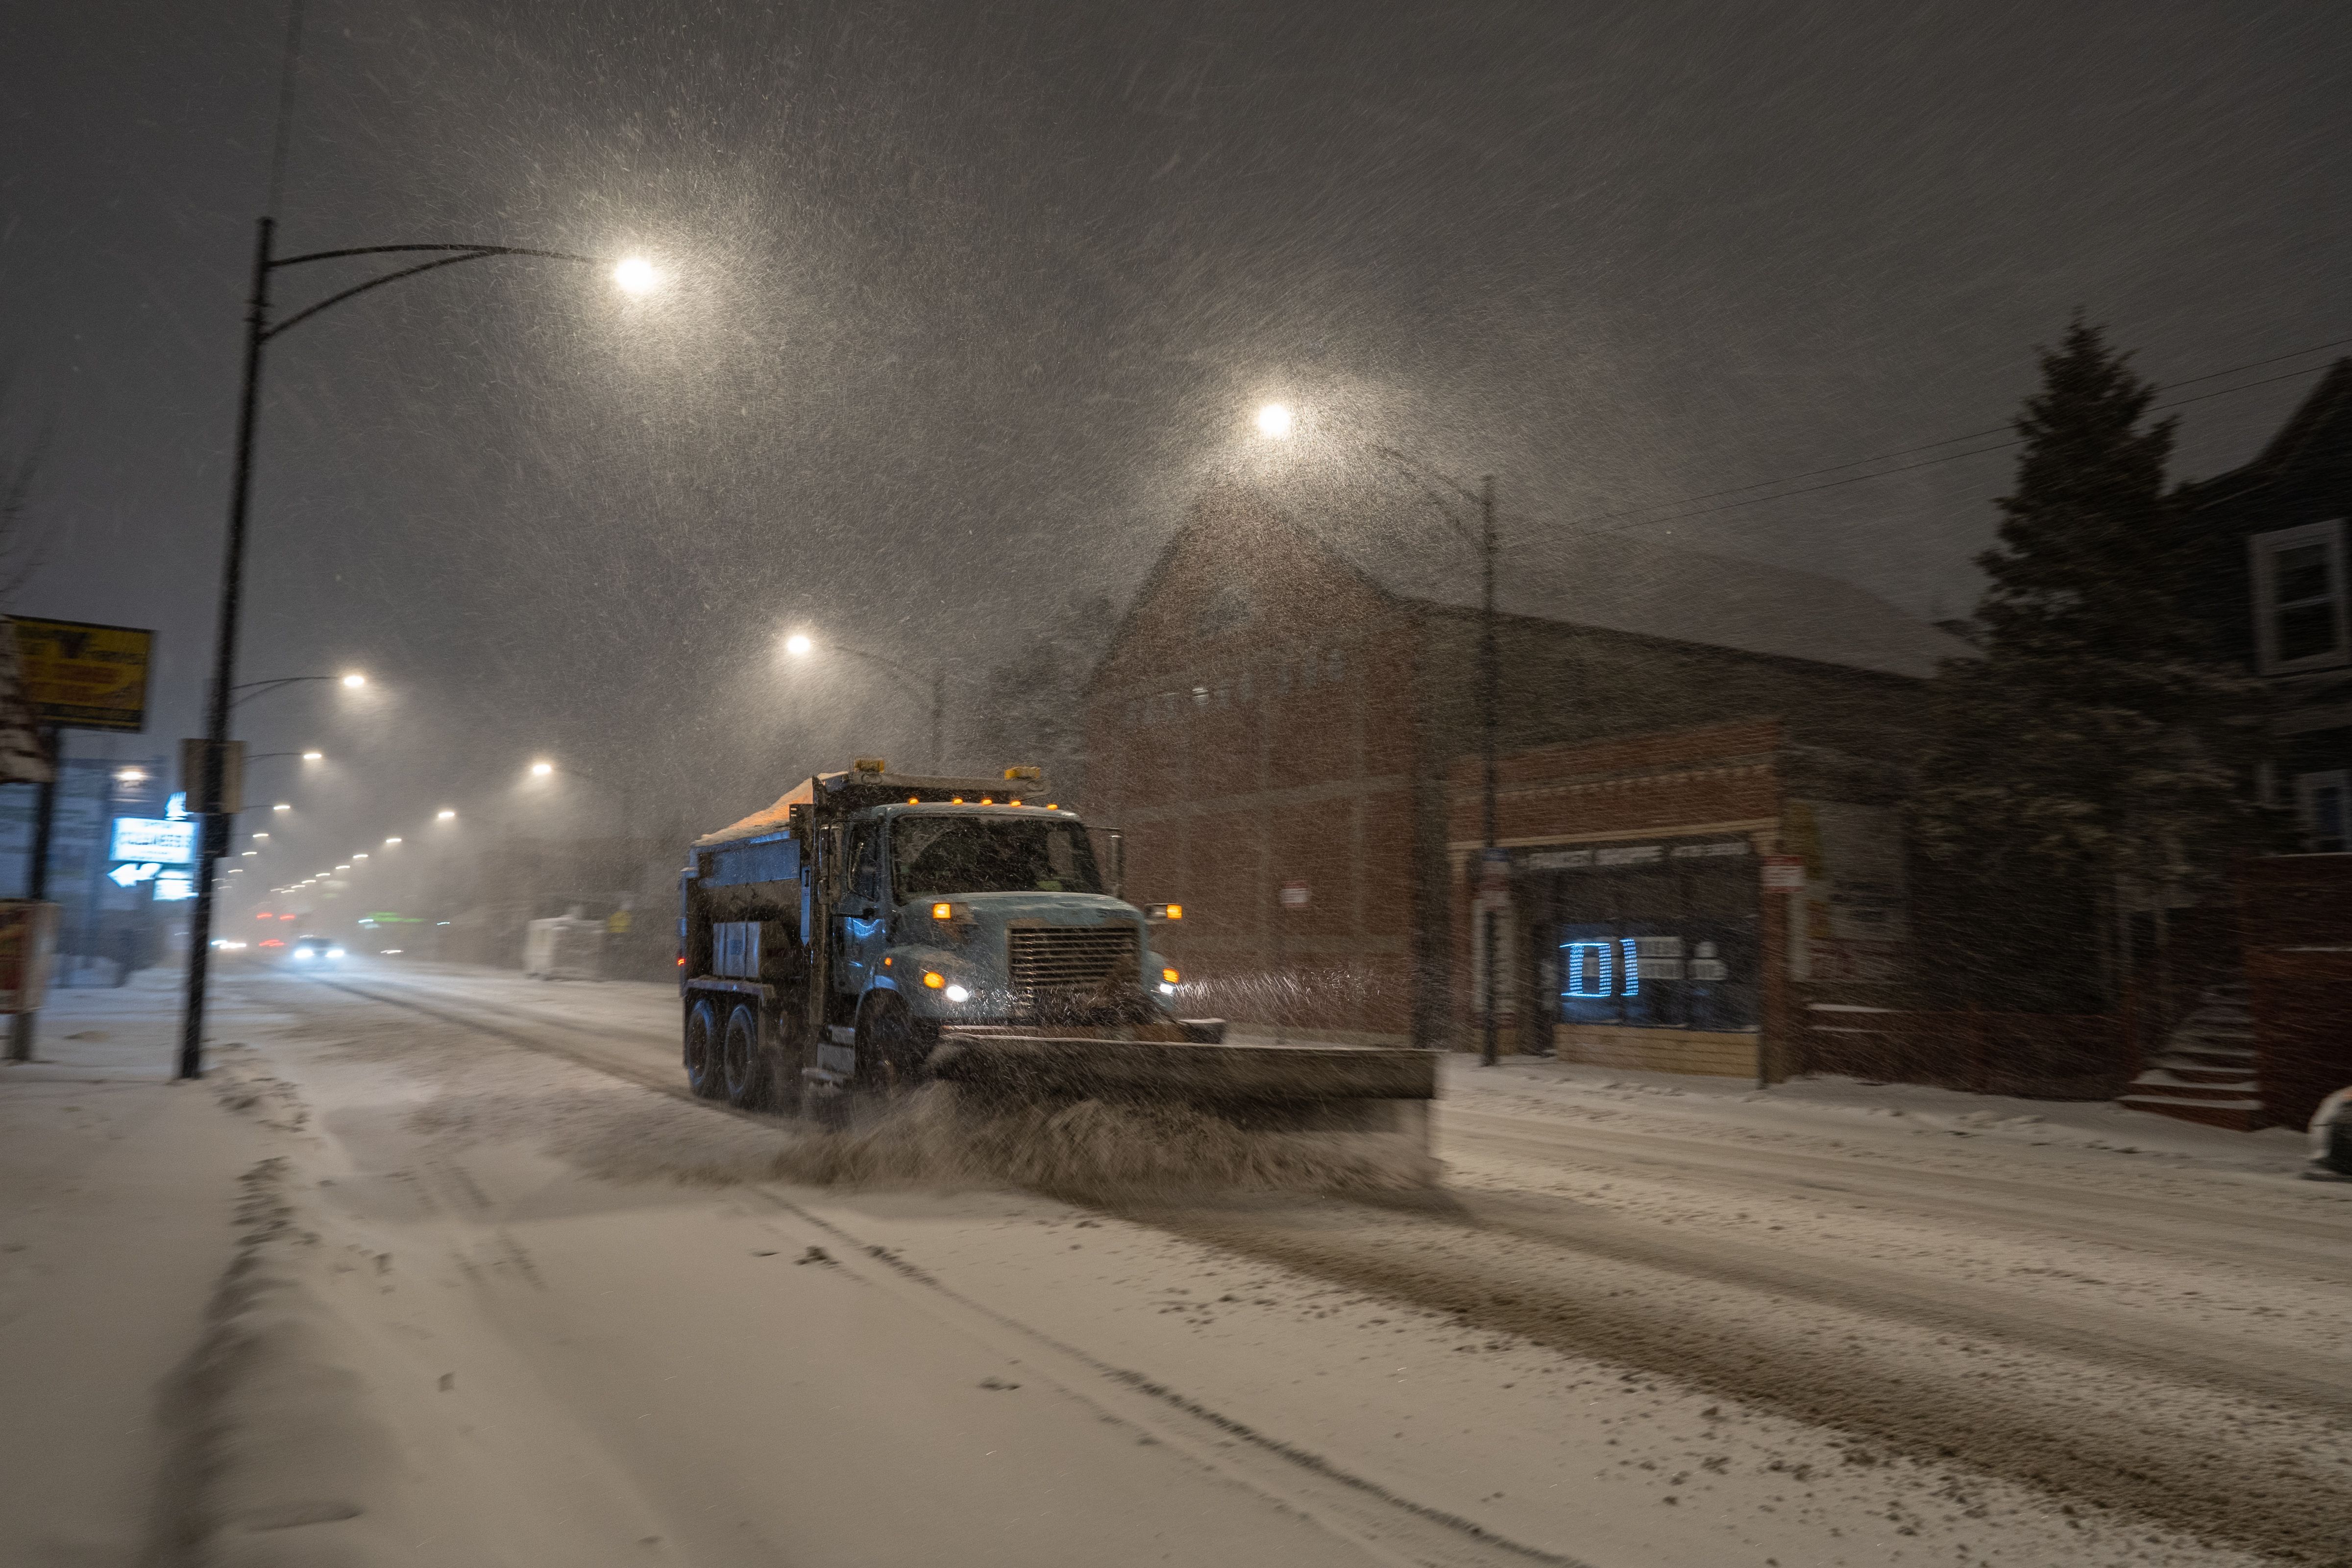 A snow plow clears streets during a Winter Storm Warning in Chicago, IL on January 30